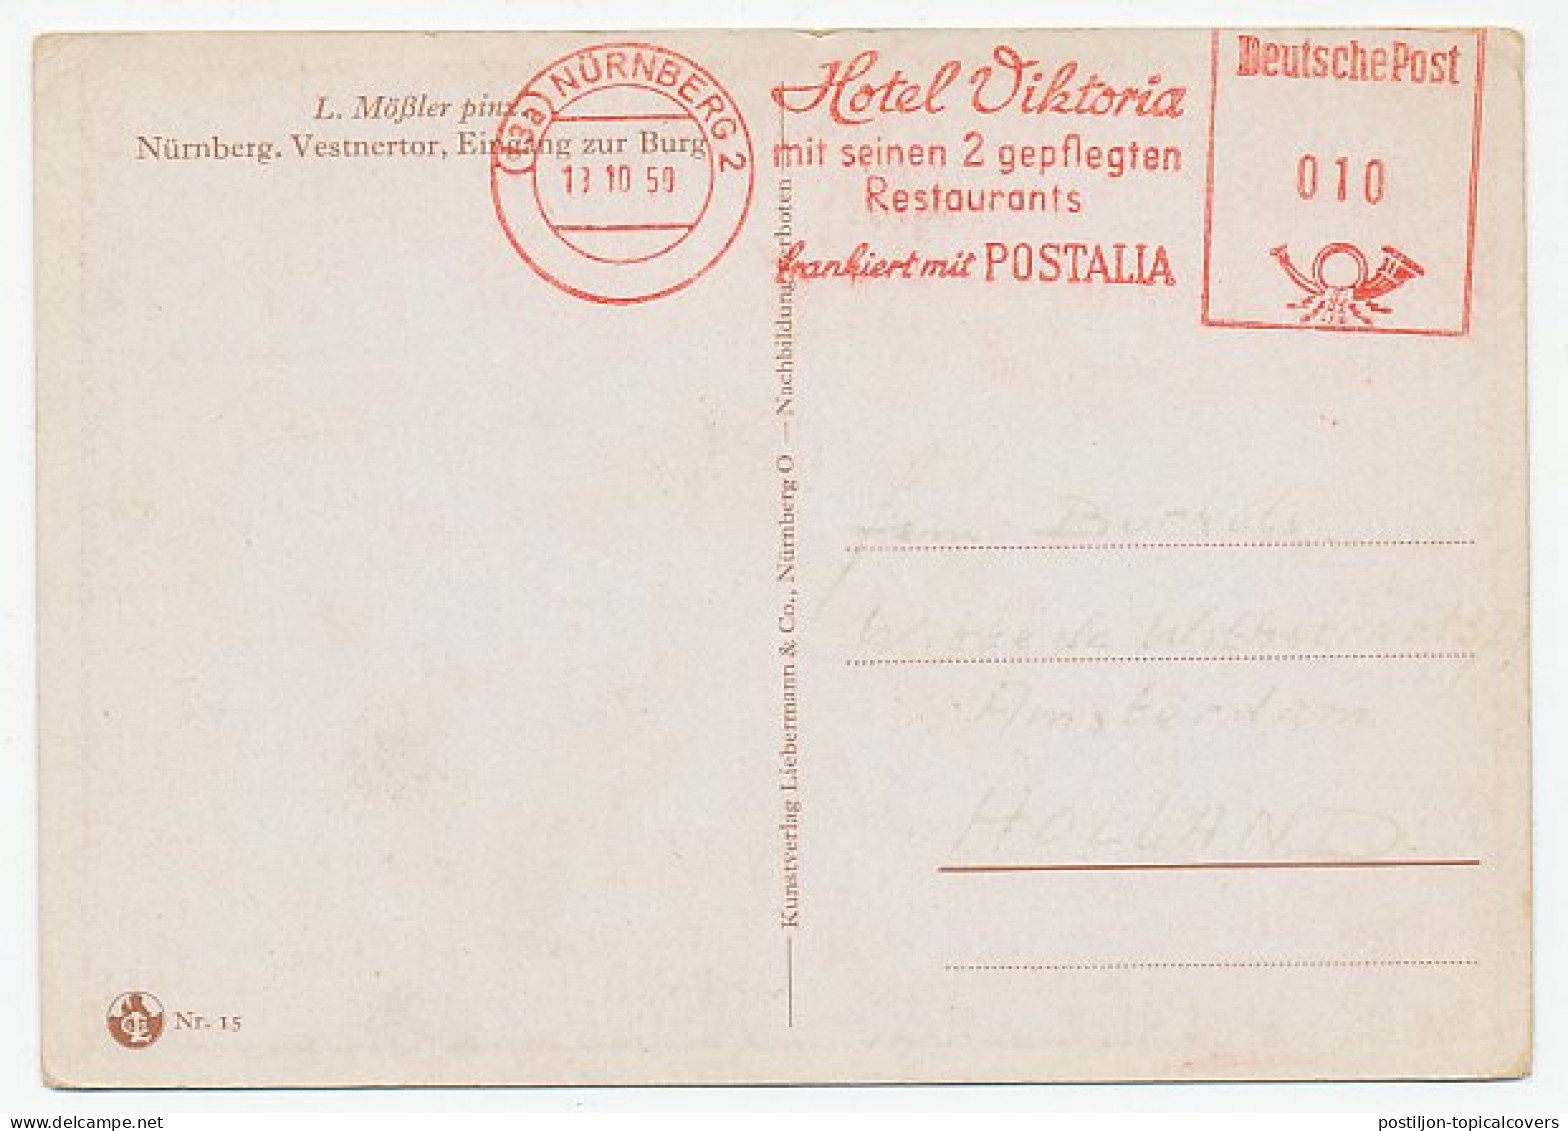 Meter Postcard Germany 1950 Franked With Postalia - Hotel Victoria - Machine Labels [ATM]